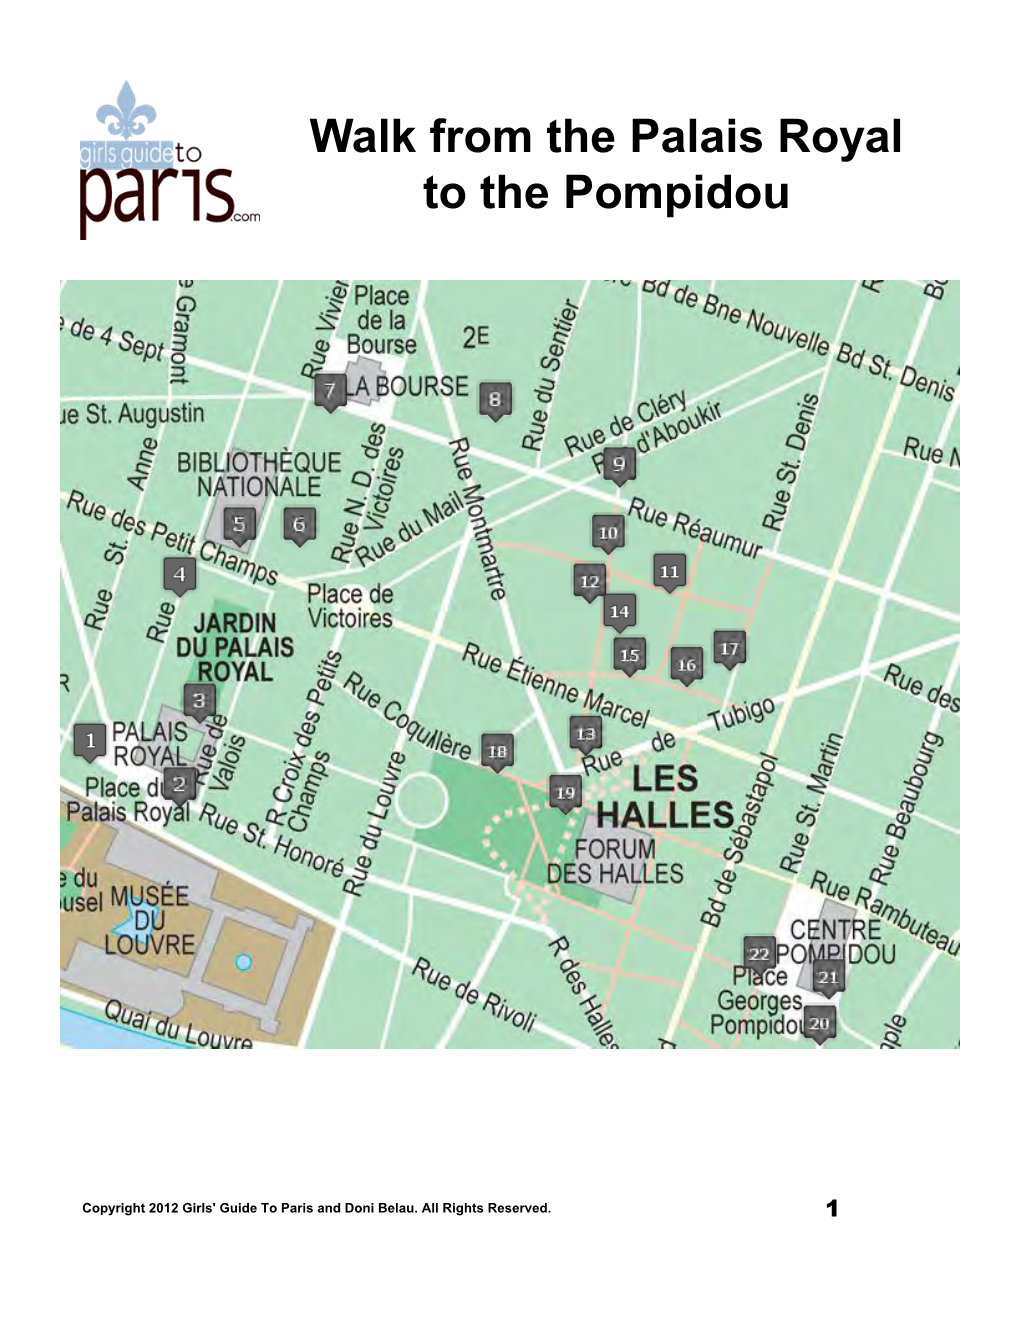 Walk from the Palais Royal to the Pompidou